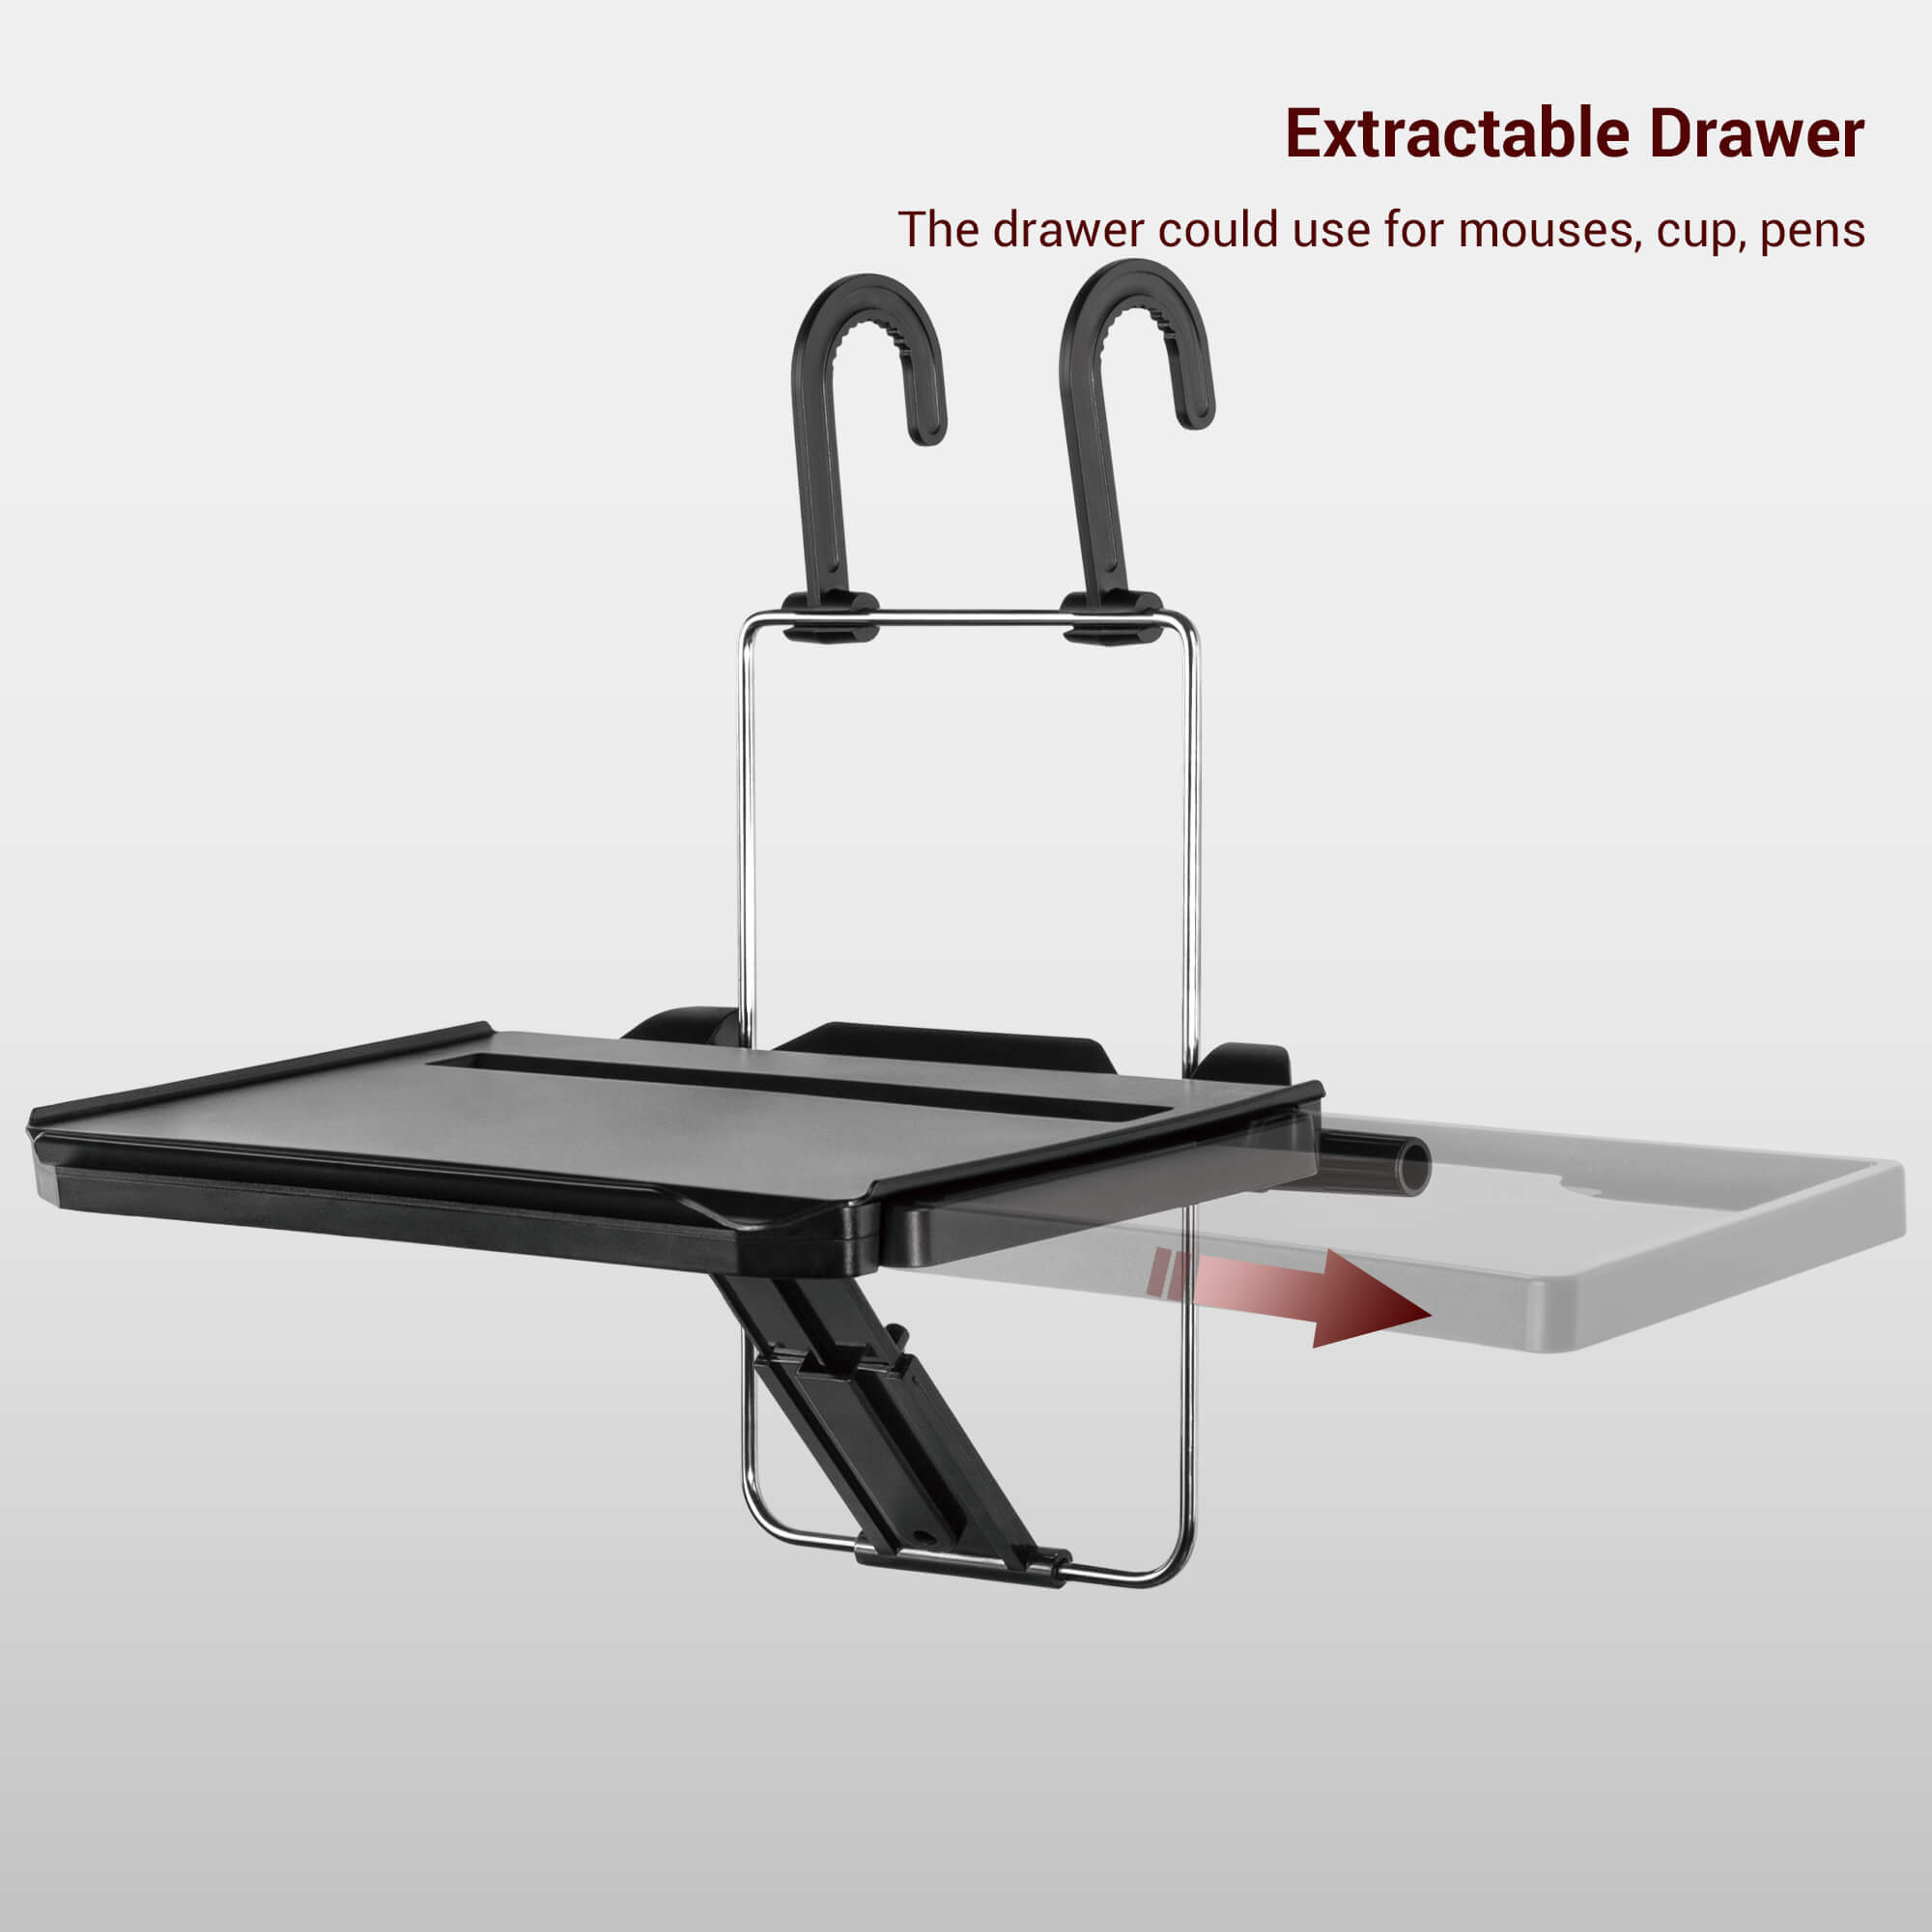 Extractable drawer